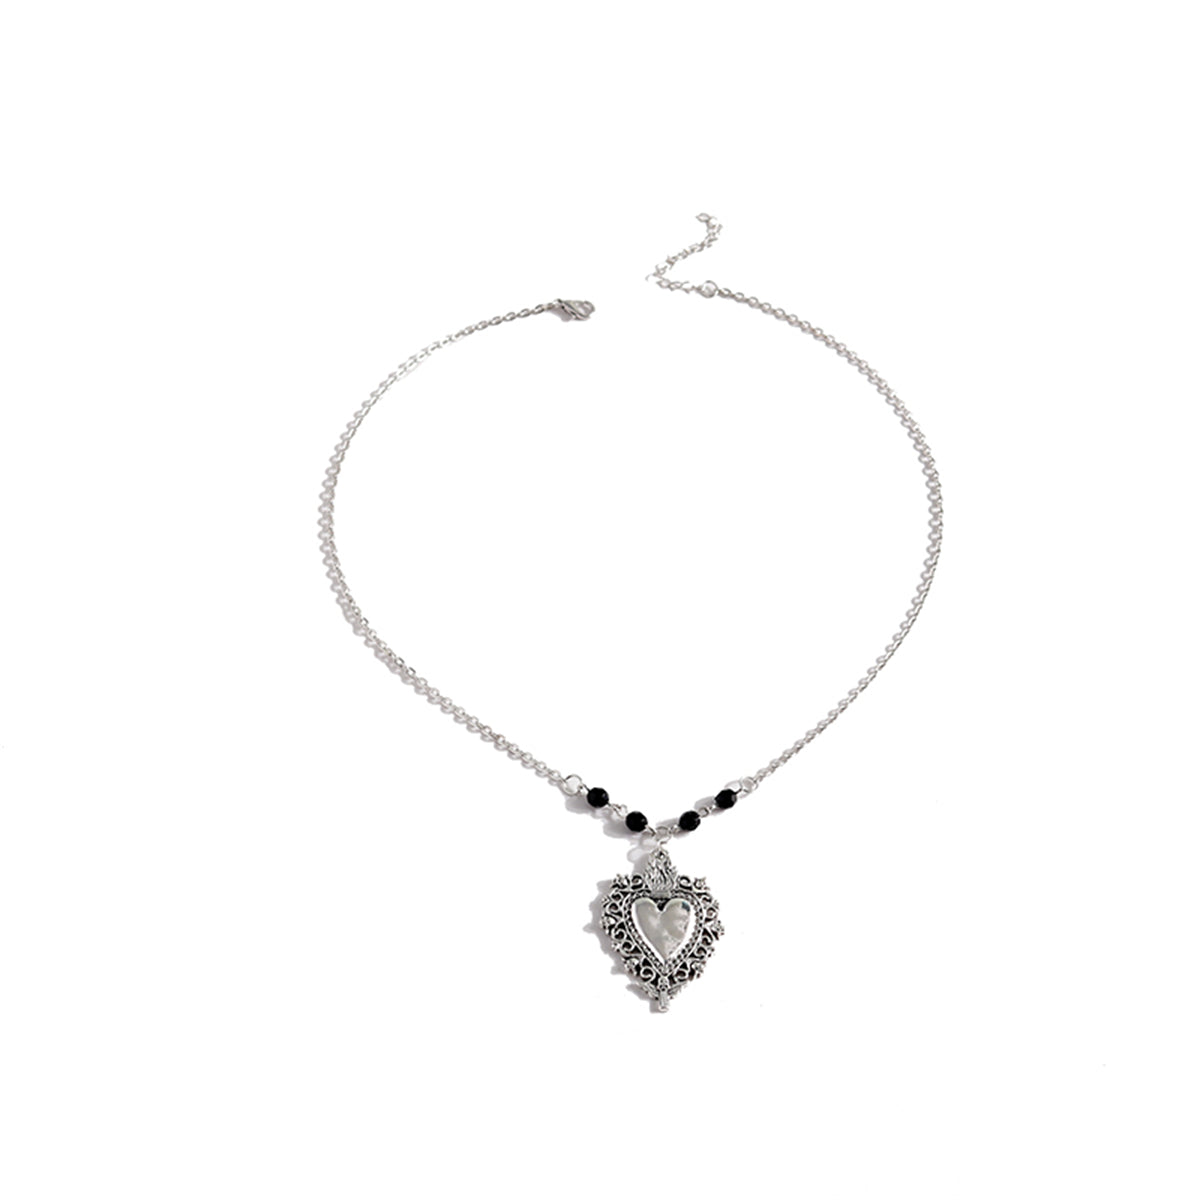 Black Acrylic & Silver-Plated Floral Heart Pendant Necklace